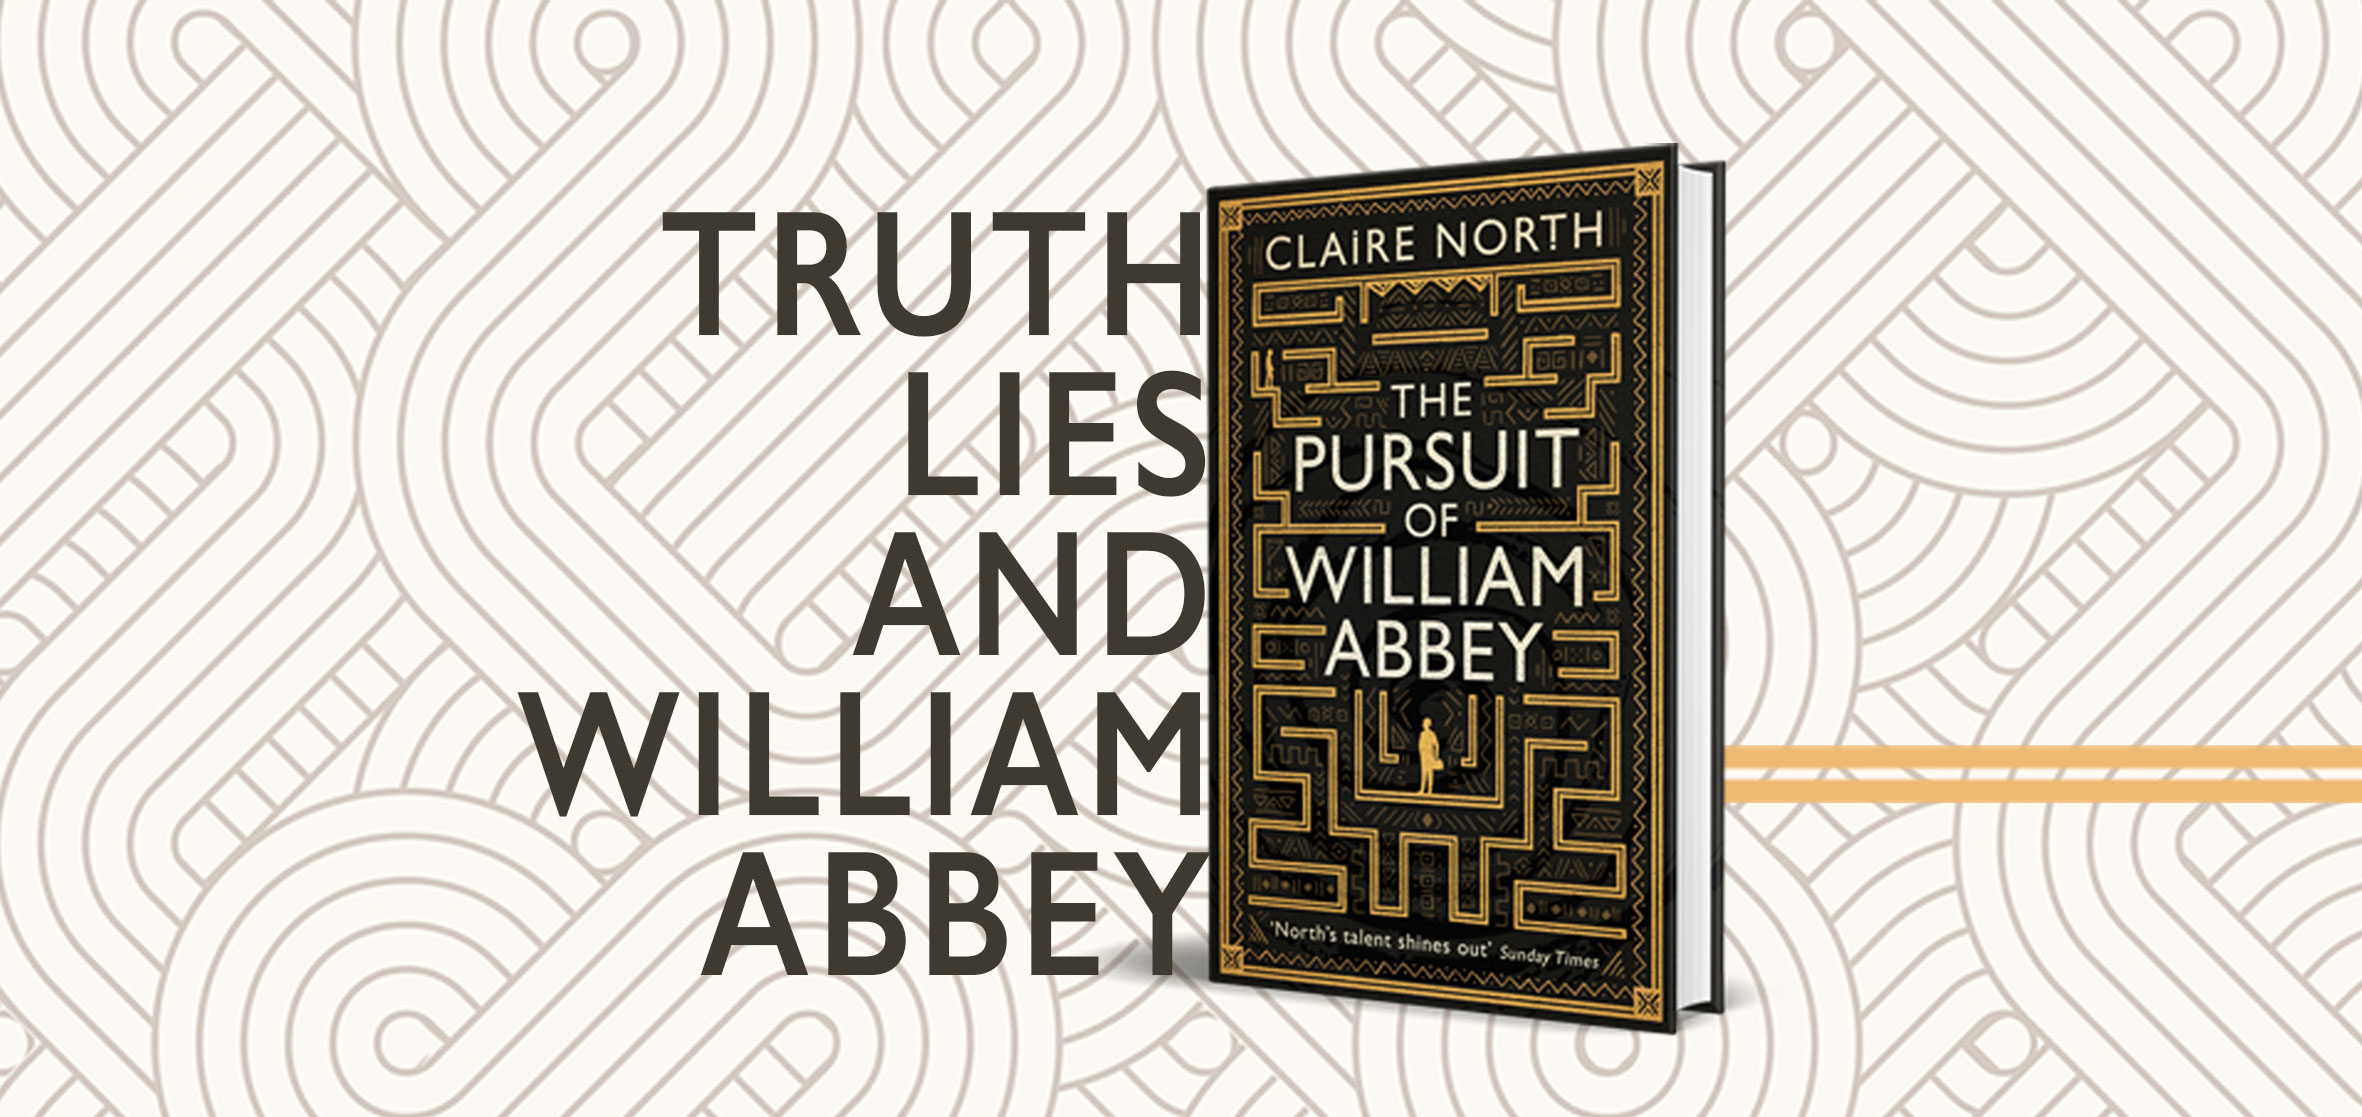 Truth Lies and William Abbey